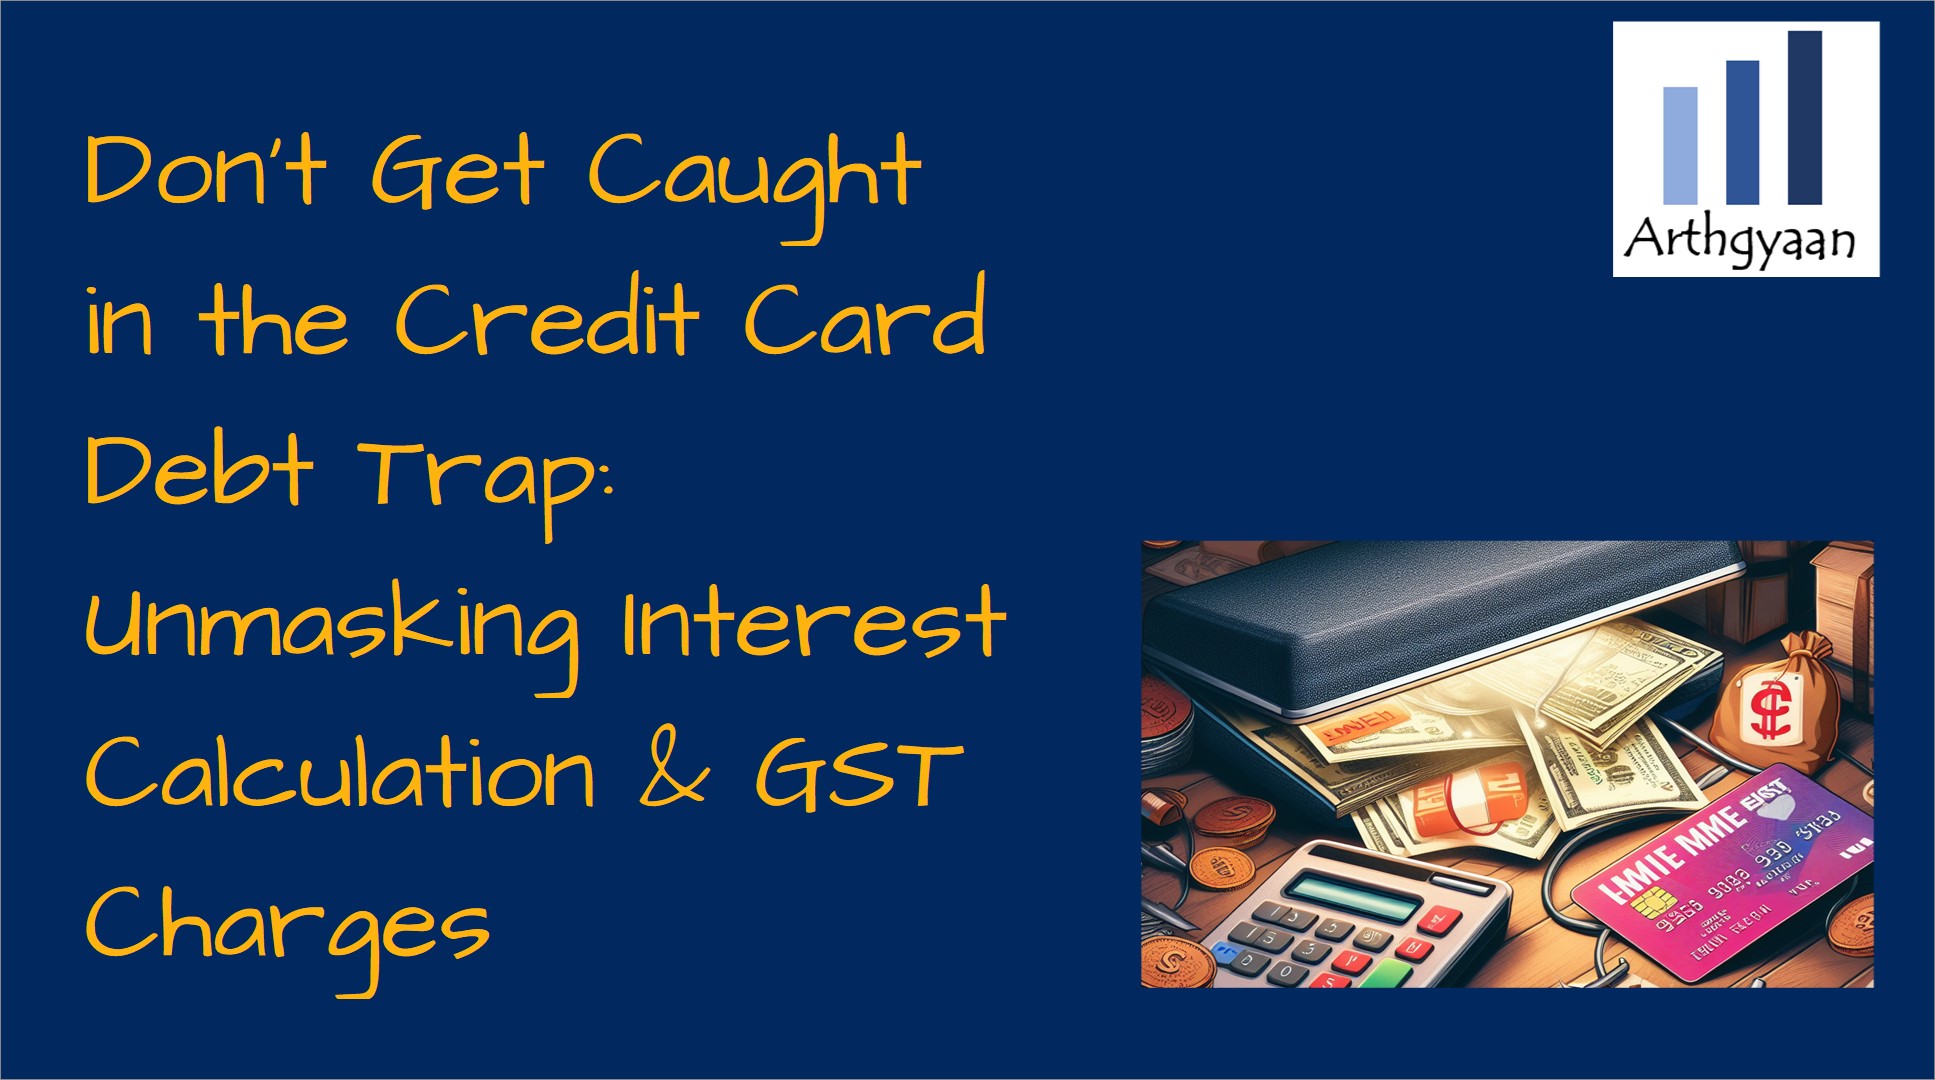 Don't Get Caught in the Credit Card Debt Trap: Unmasking Interest Calculation & GST Charges